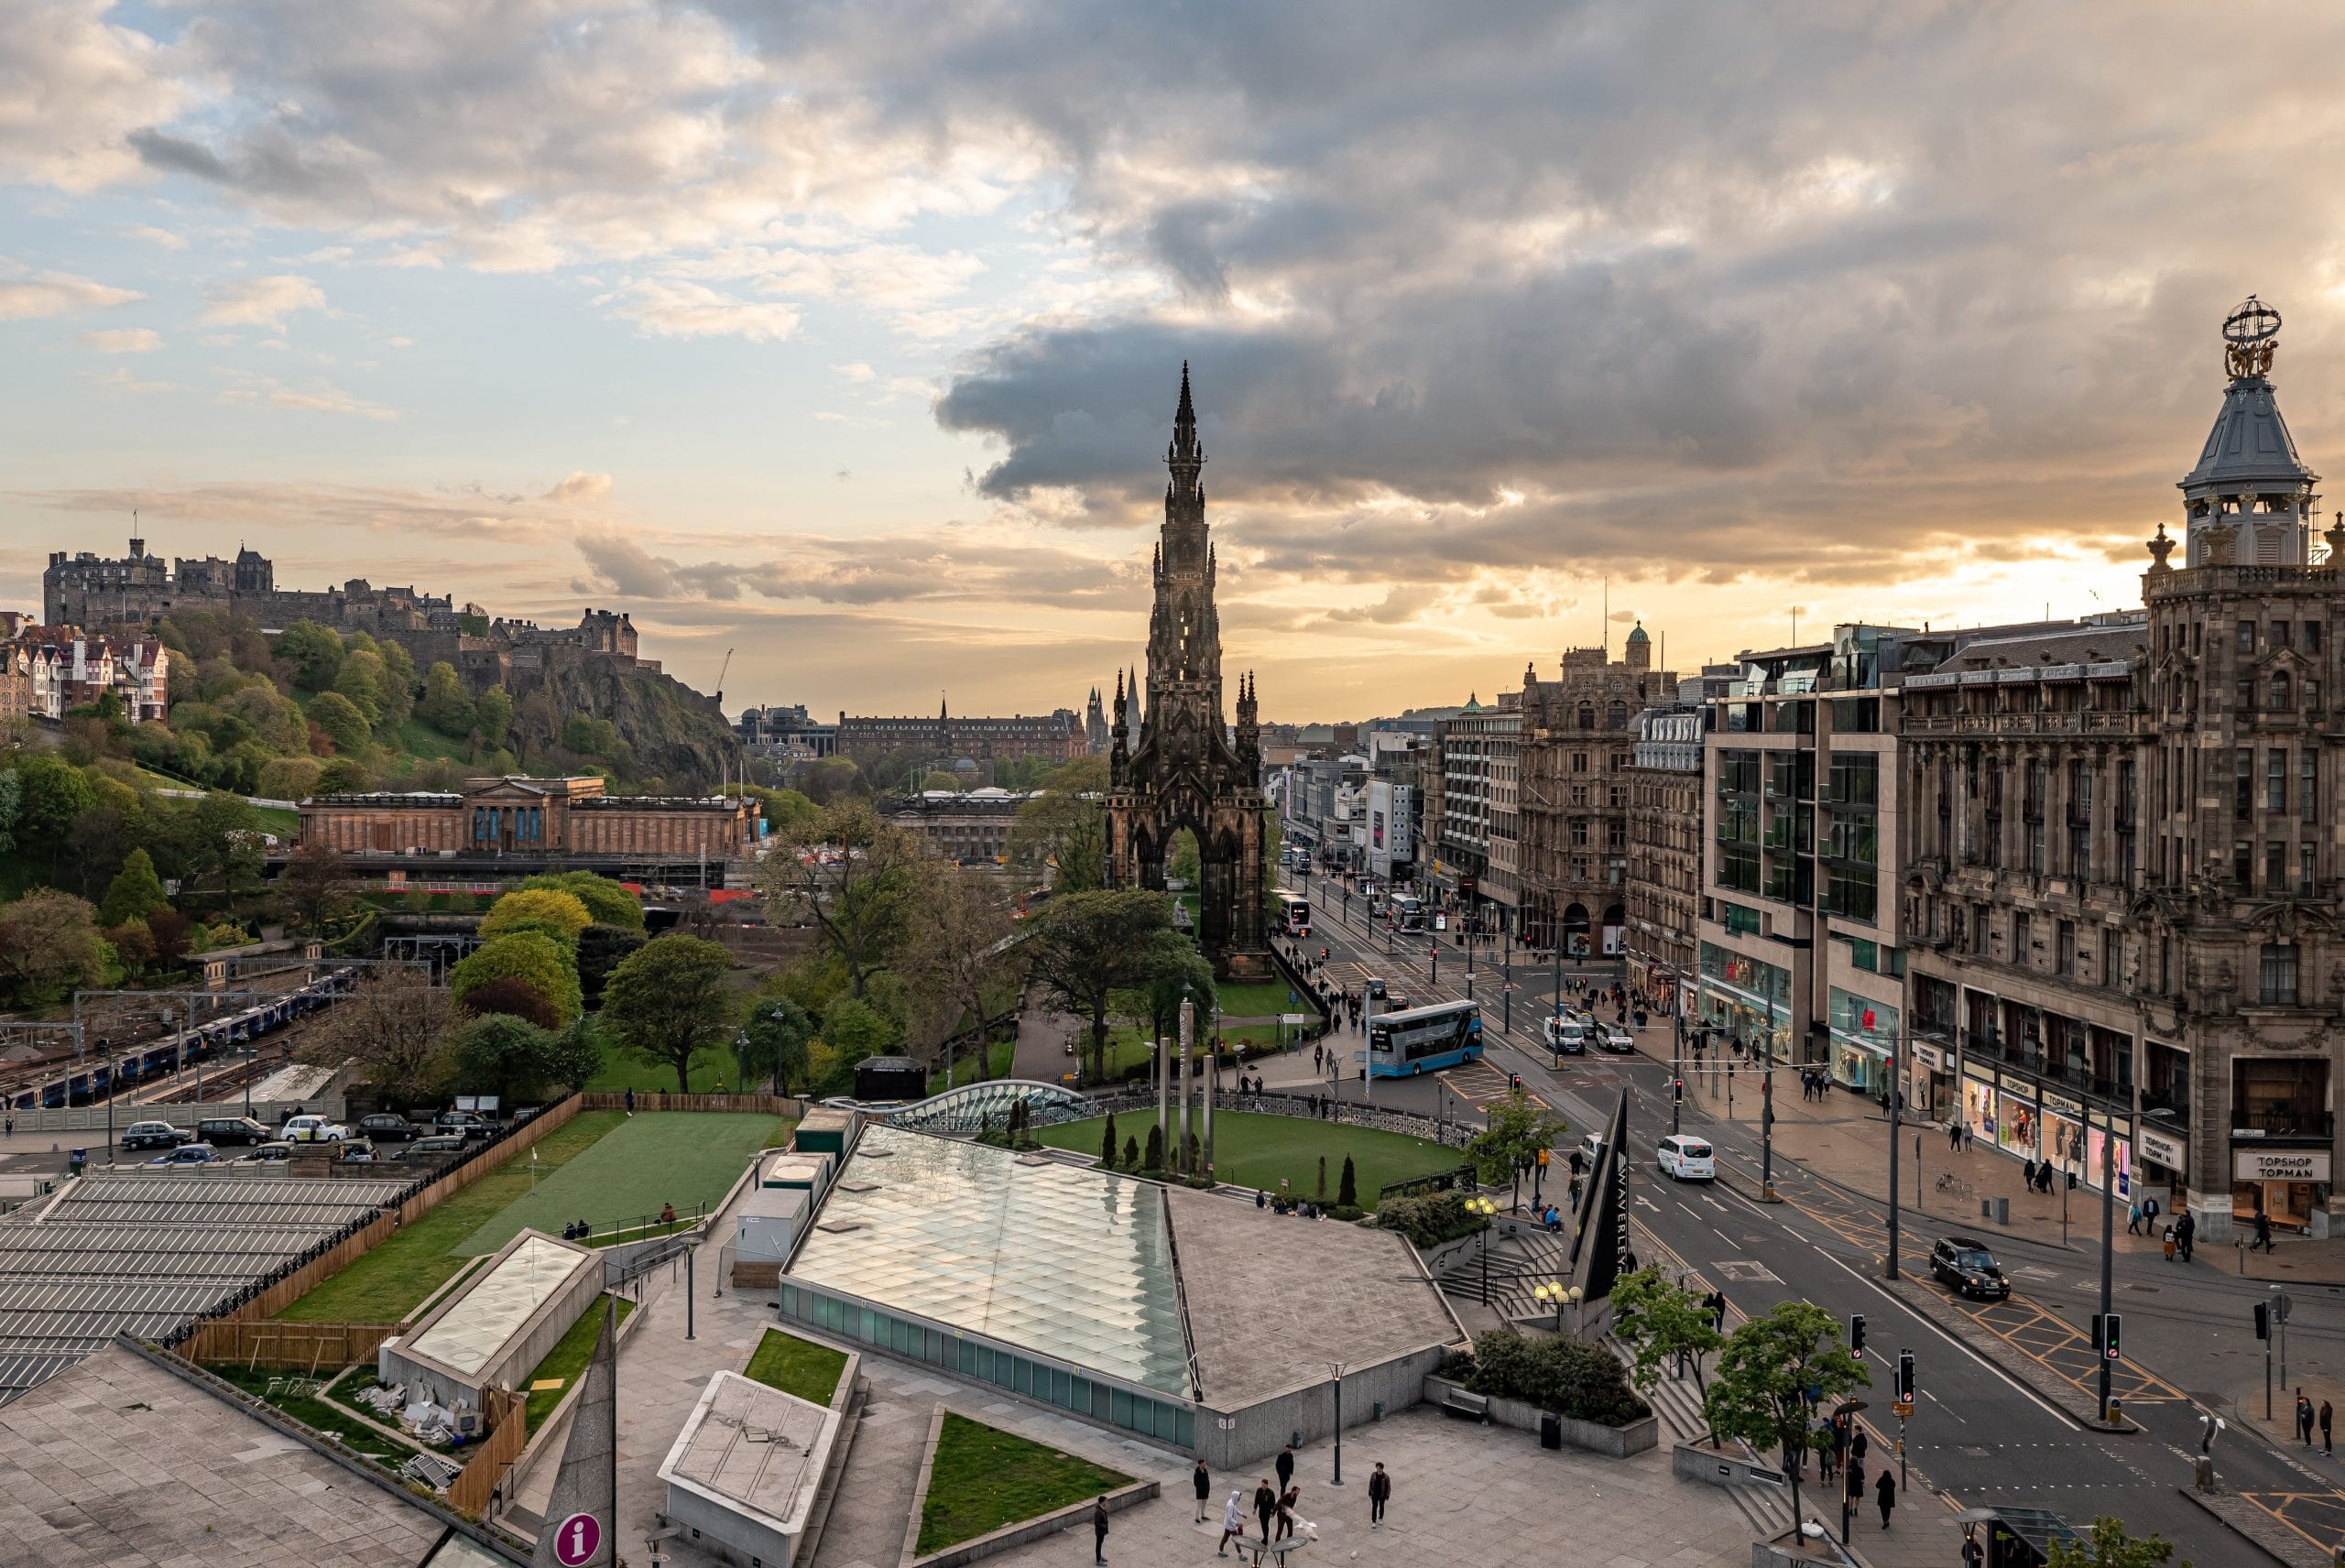 Edinburgh city centre from above with the castle on the left hand side, Scott Monument in the middle and Princes street shops on the right.